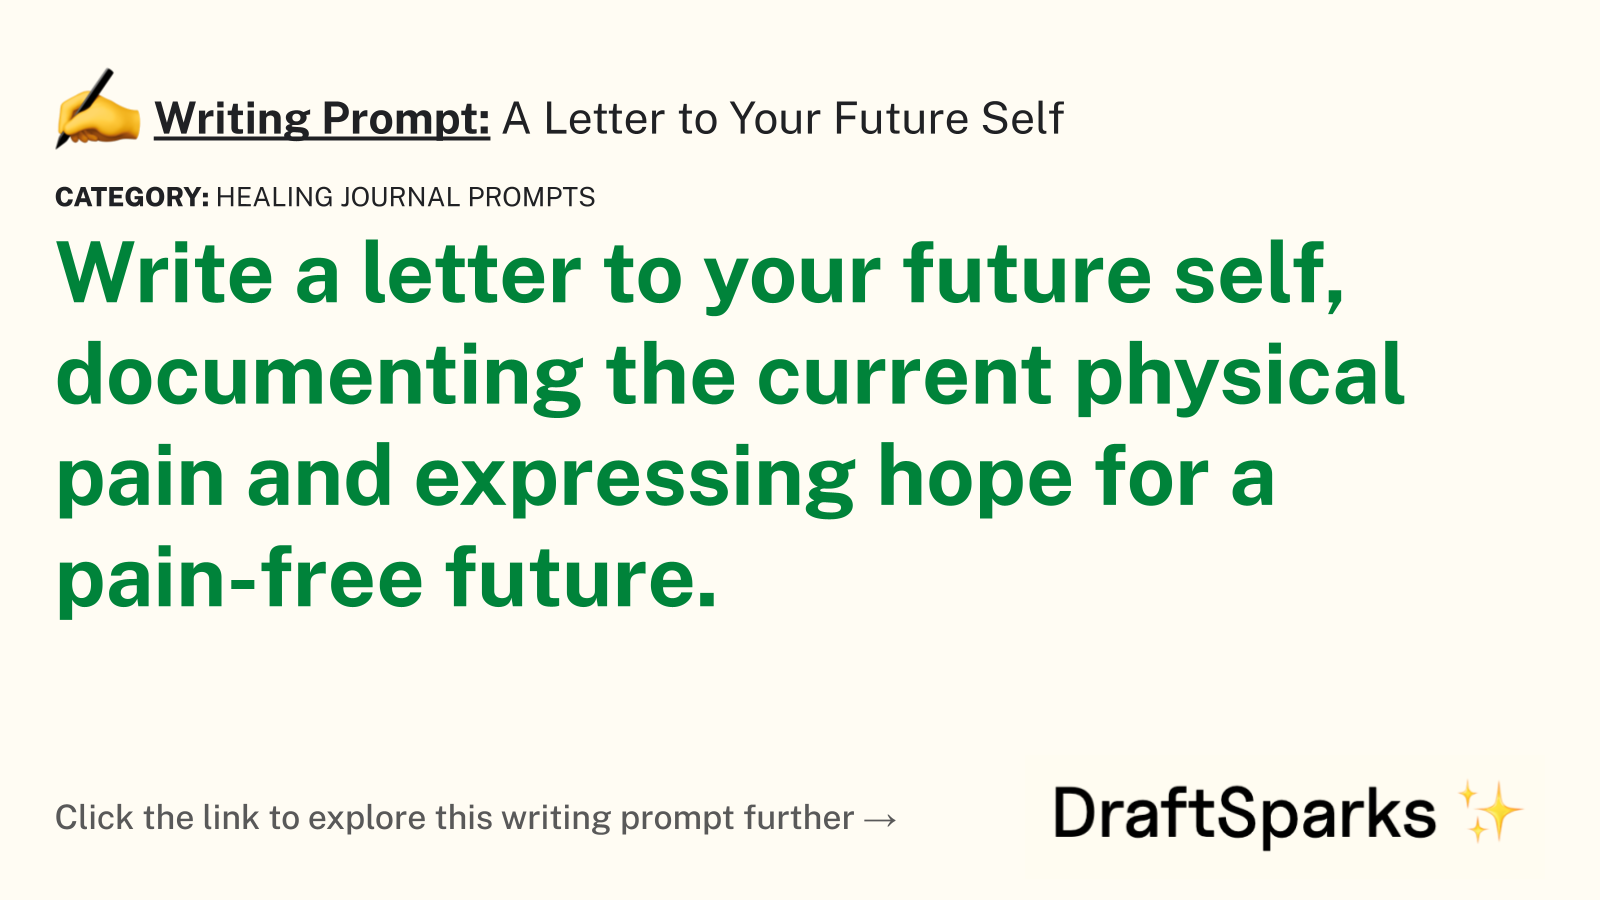 A Letter to Your Future Self